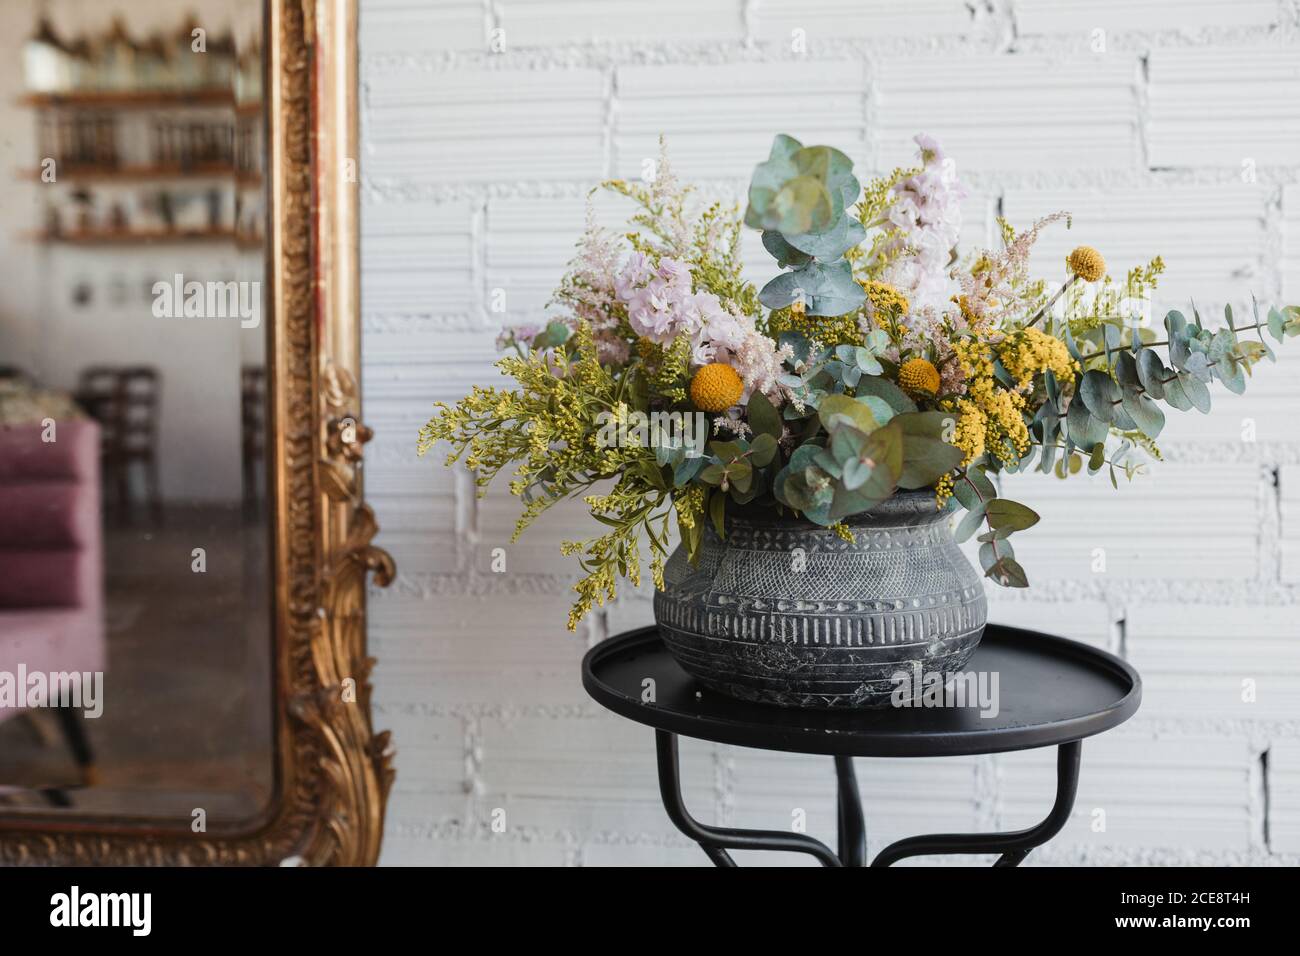 Beautiful bouquet with various flowers including goldenrod and craspedia flowers with green eucalyptus branches arranged in ornamental ceramic pot placed on small table against white brick wall with mirror in creative floristry studio Stock Photo